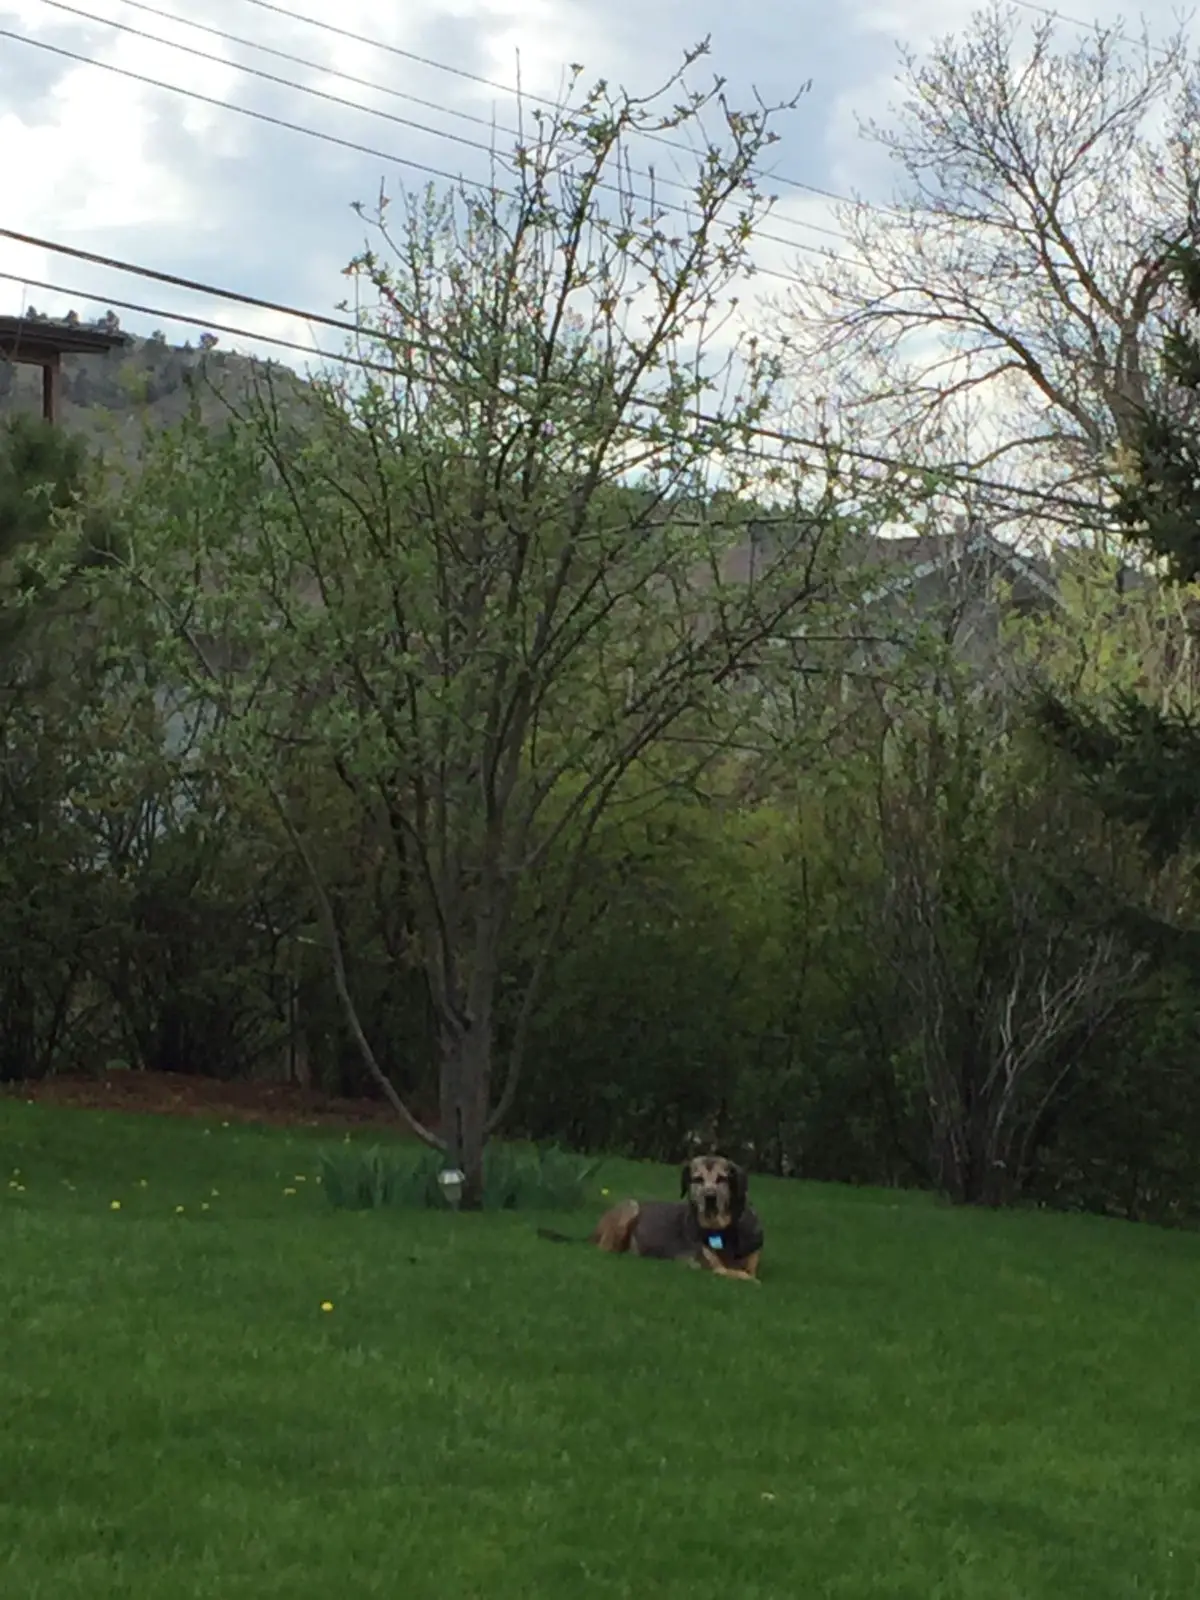 Black and tan dog lays under a tree in the bright, green, grass